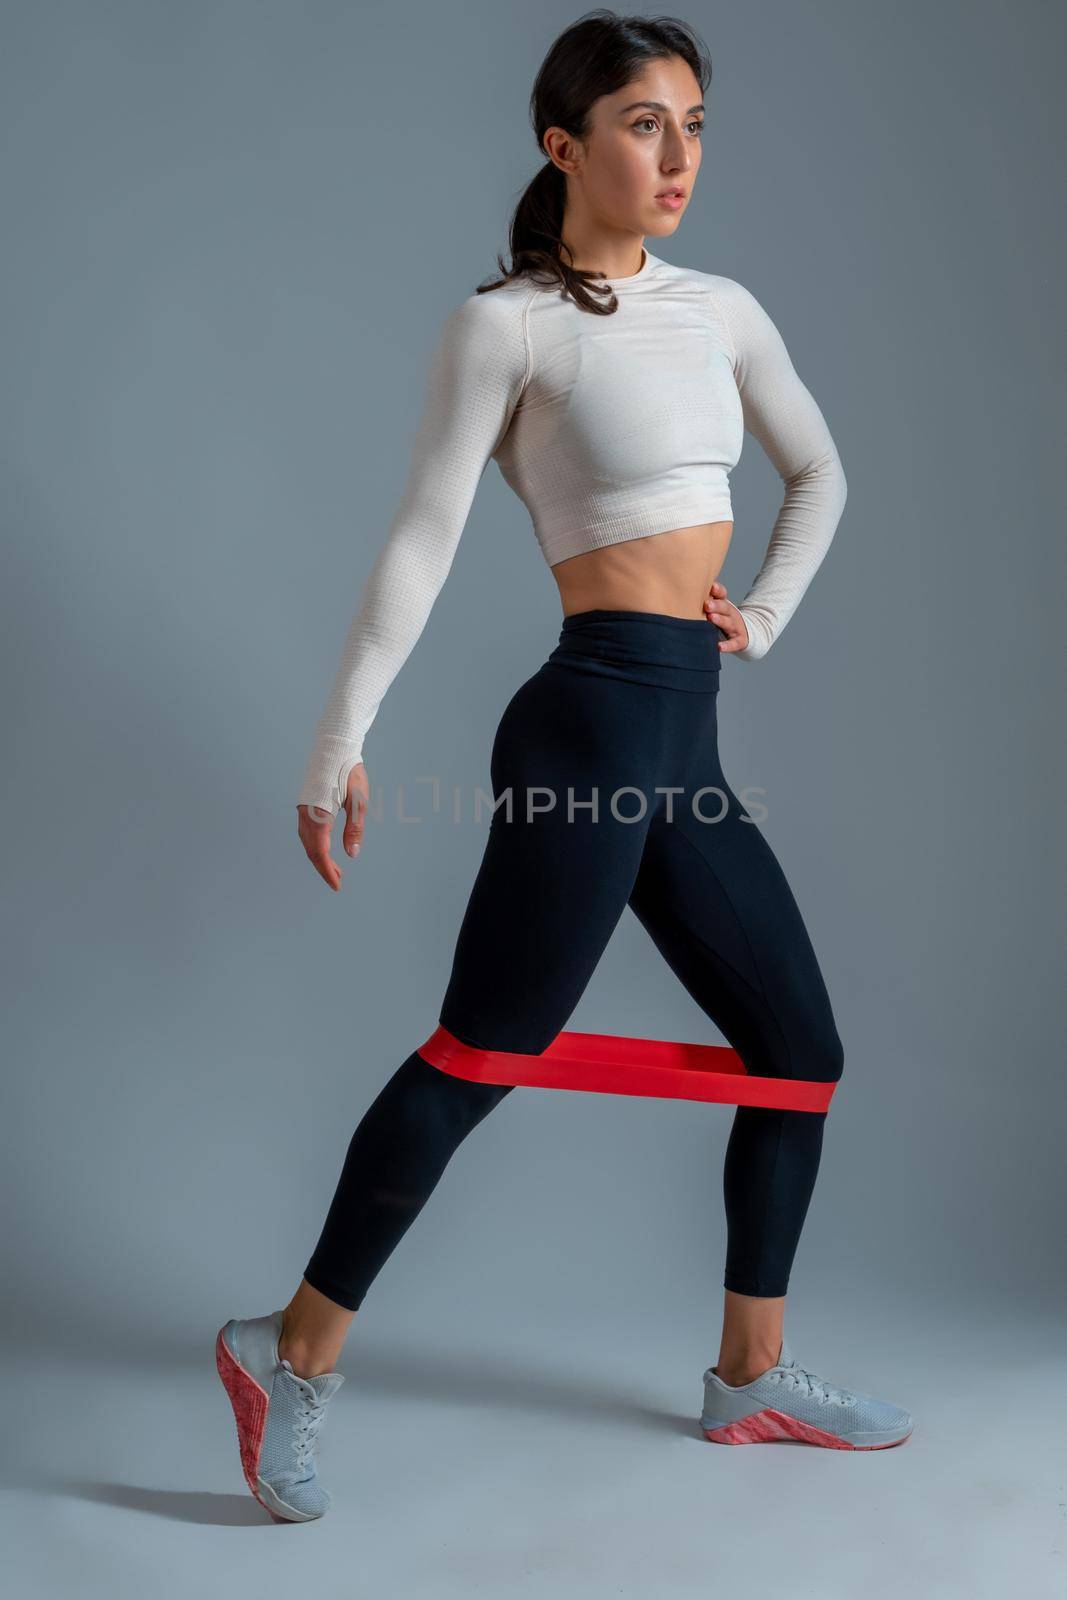 Full length portrait of athletic young woman performing leg and glute workout with loop resistance band in studio on grey background. Active lifestyle and fitness concept